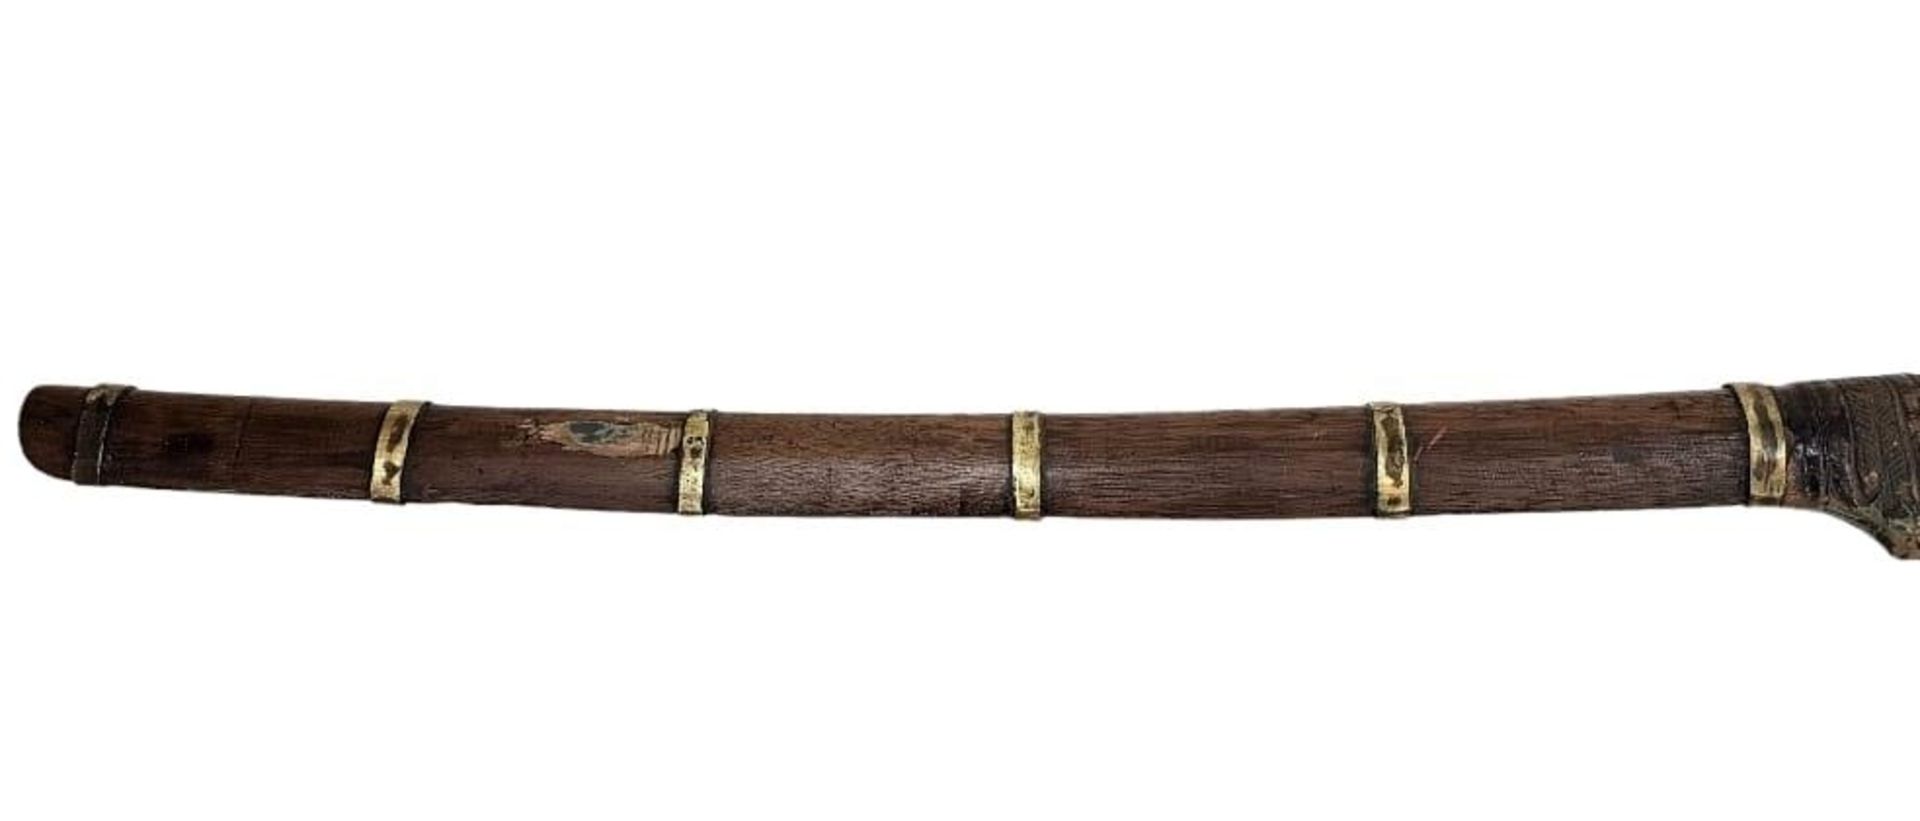 A Very Rare 19 th Century Oriental Short Sword with Wooden Hilt Carved as a Mythical Creature. - Bild 7 aus 11